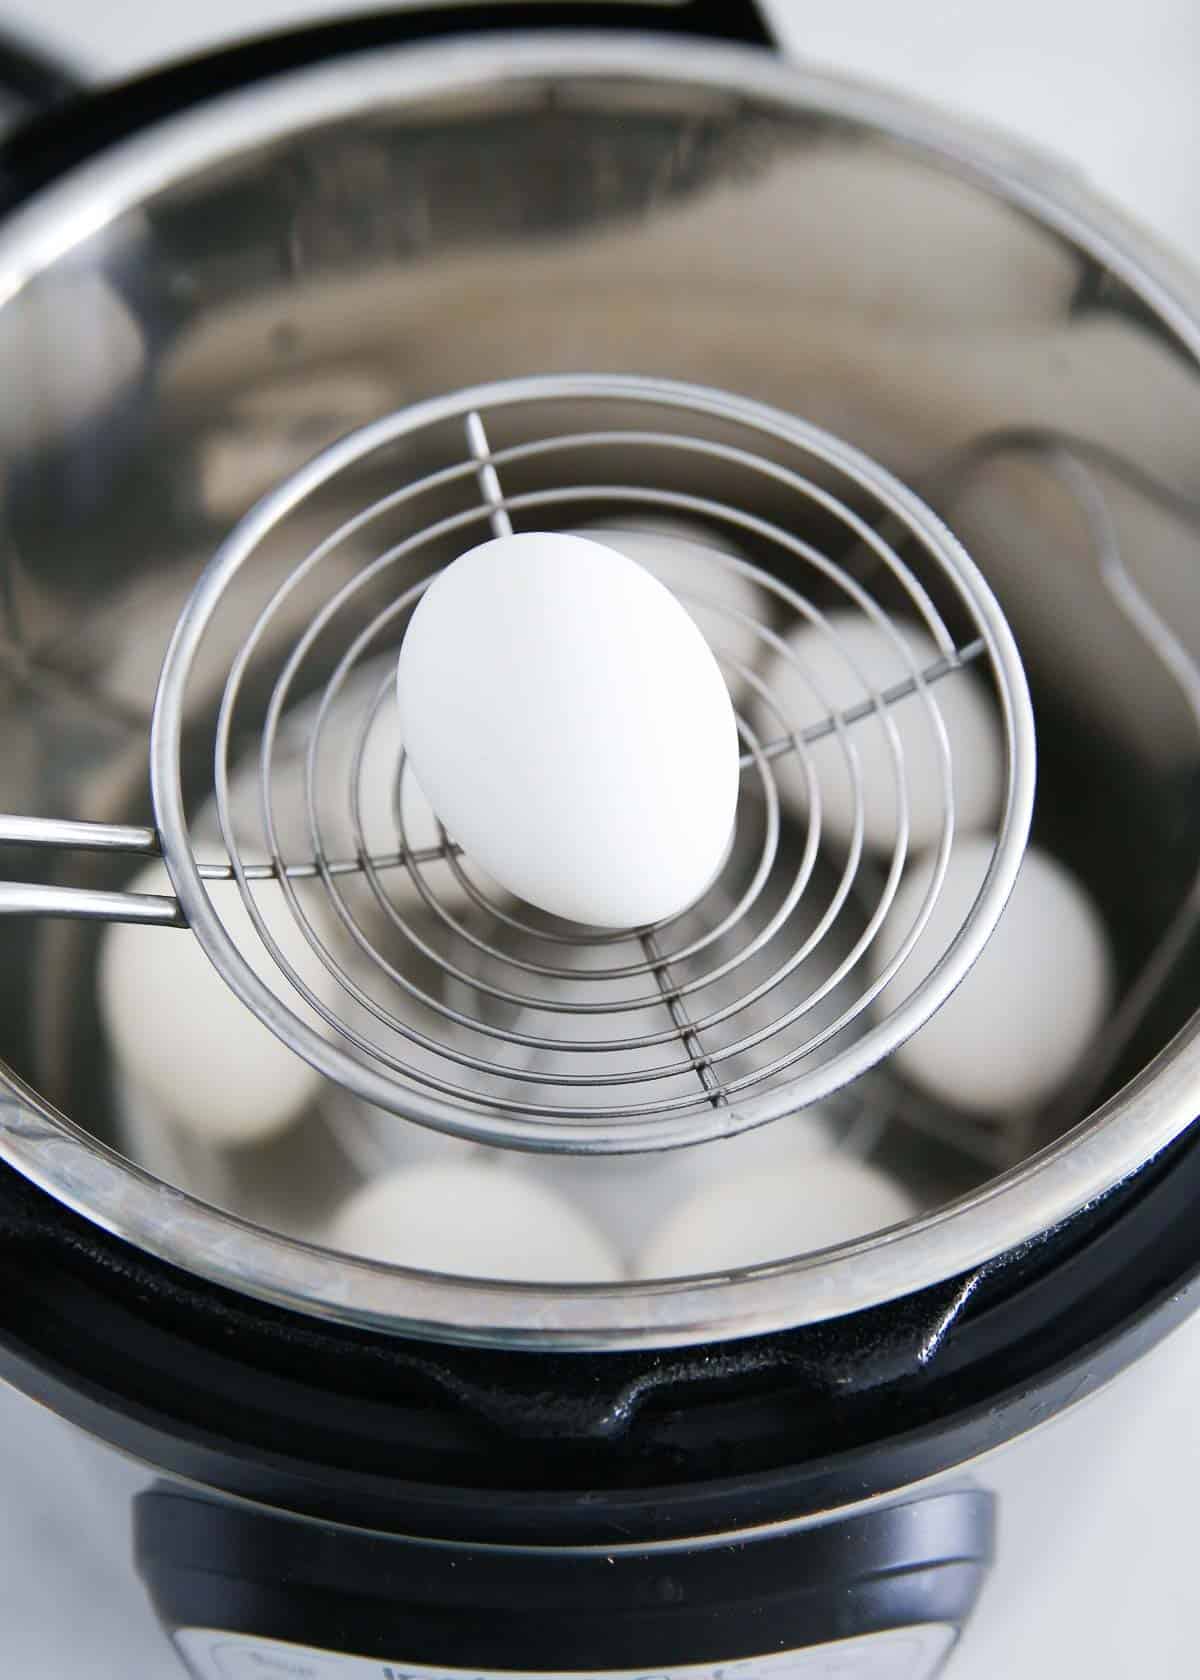 Removing egg from instant pot with a spoon.